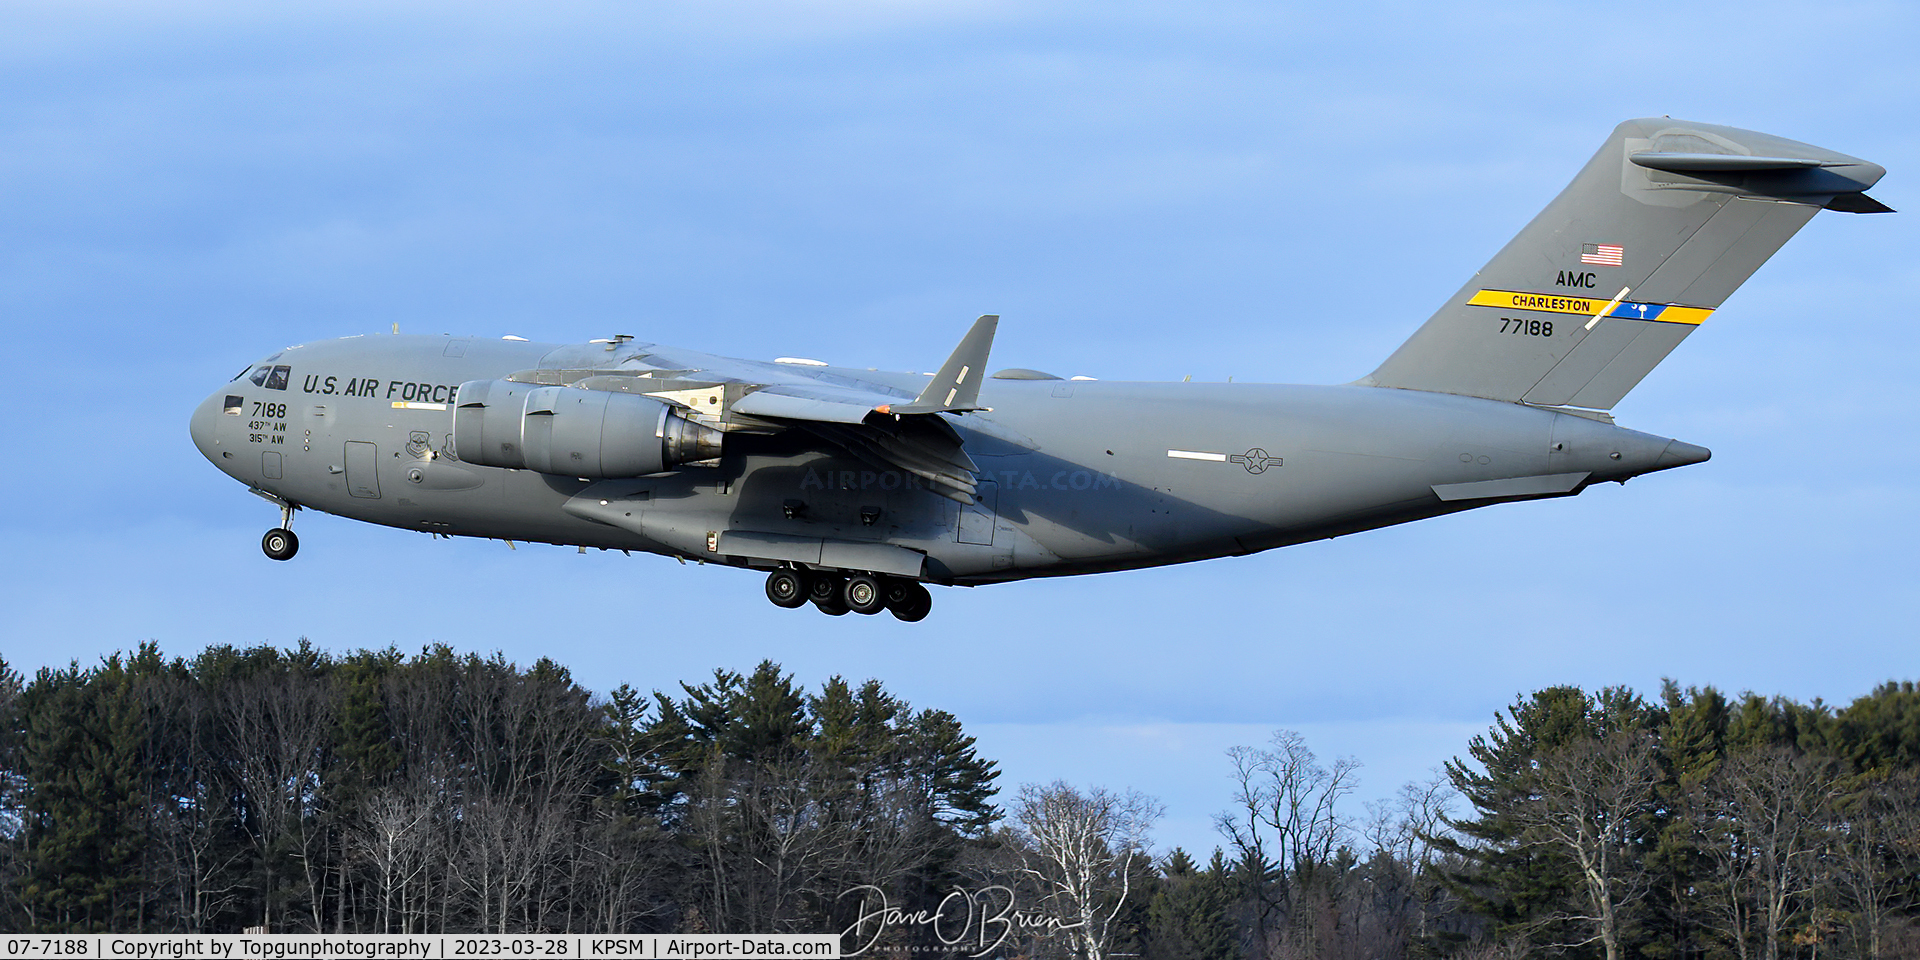 07-7188, 2007 Boeing C-17A Globemaster III C/N P-188, 437th AW dropping into Pease